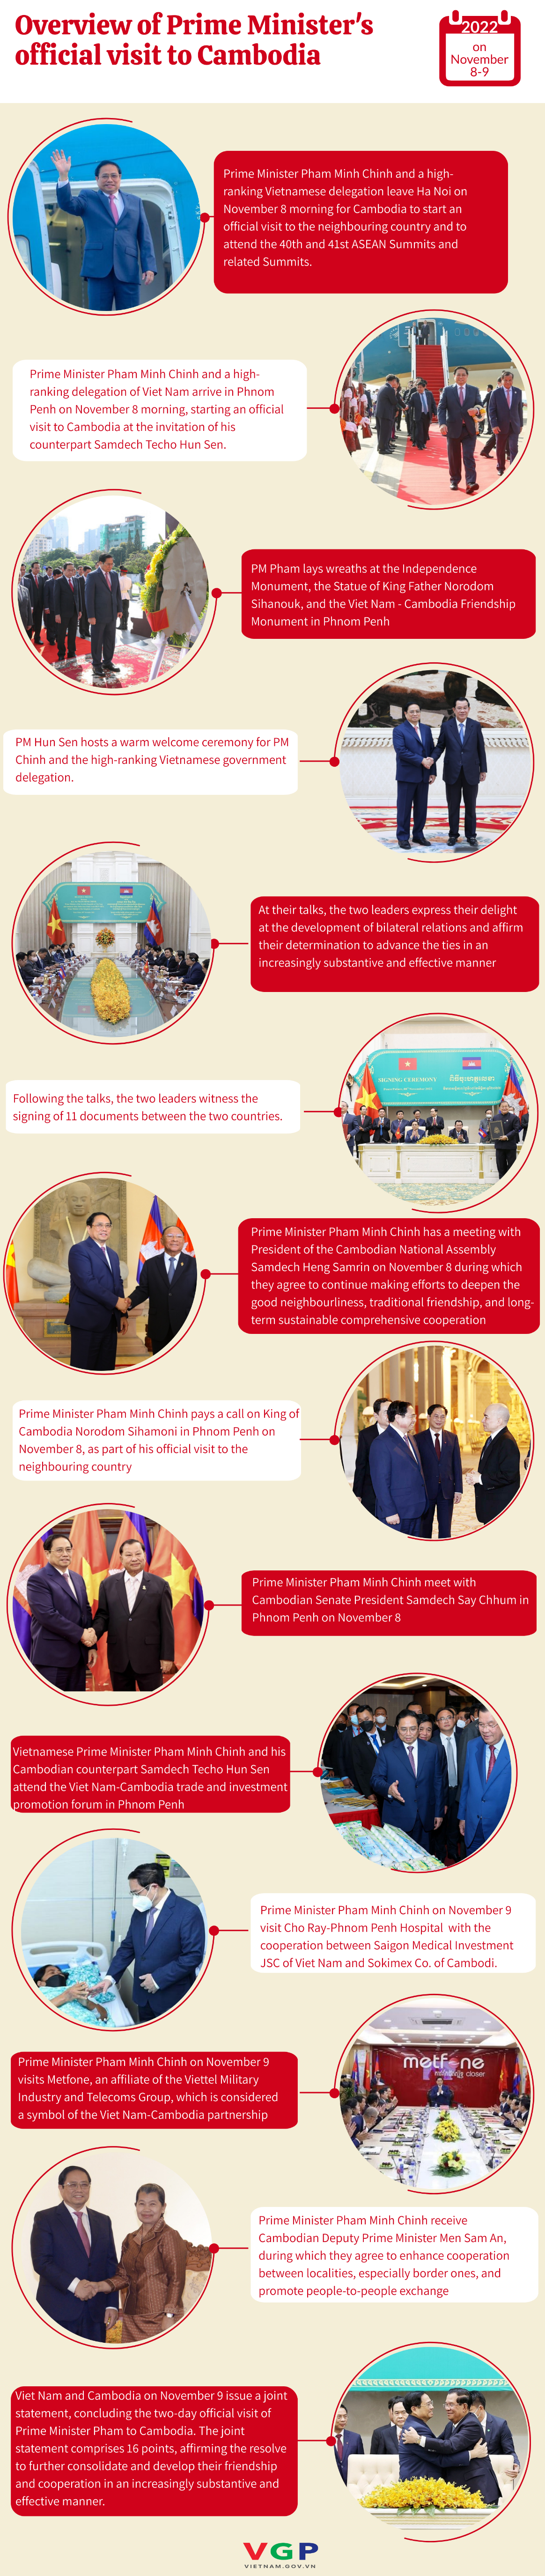 Review of Prime Minister's official visit to Cambodia - Ảnh 1.